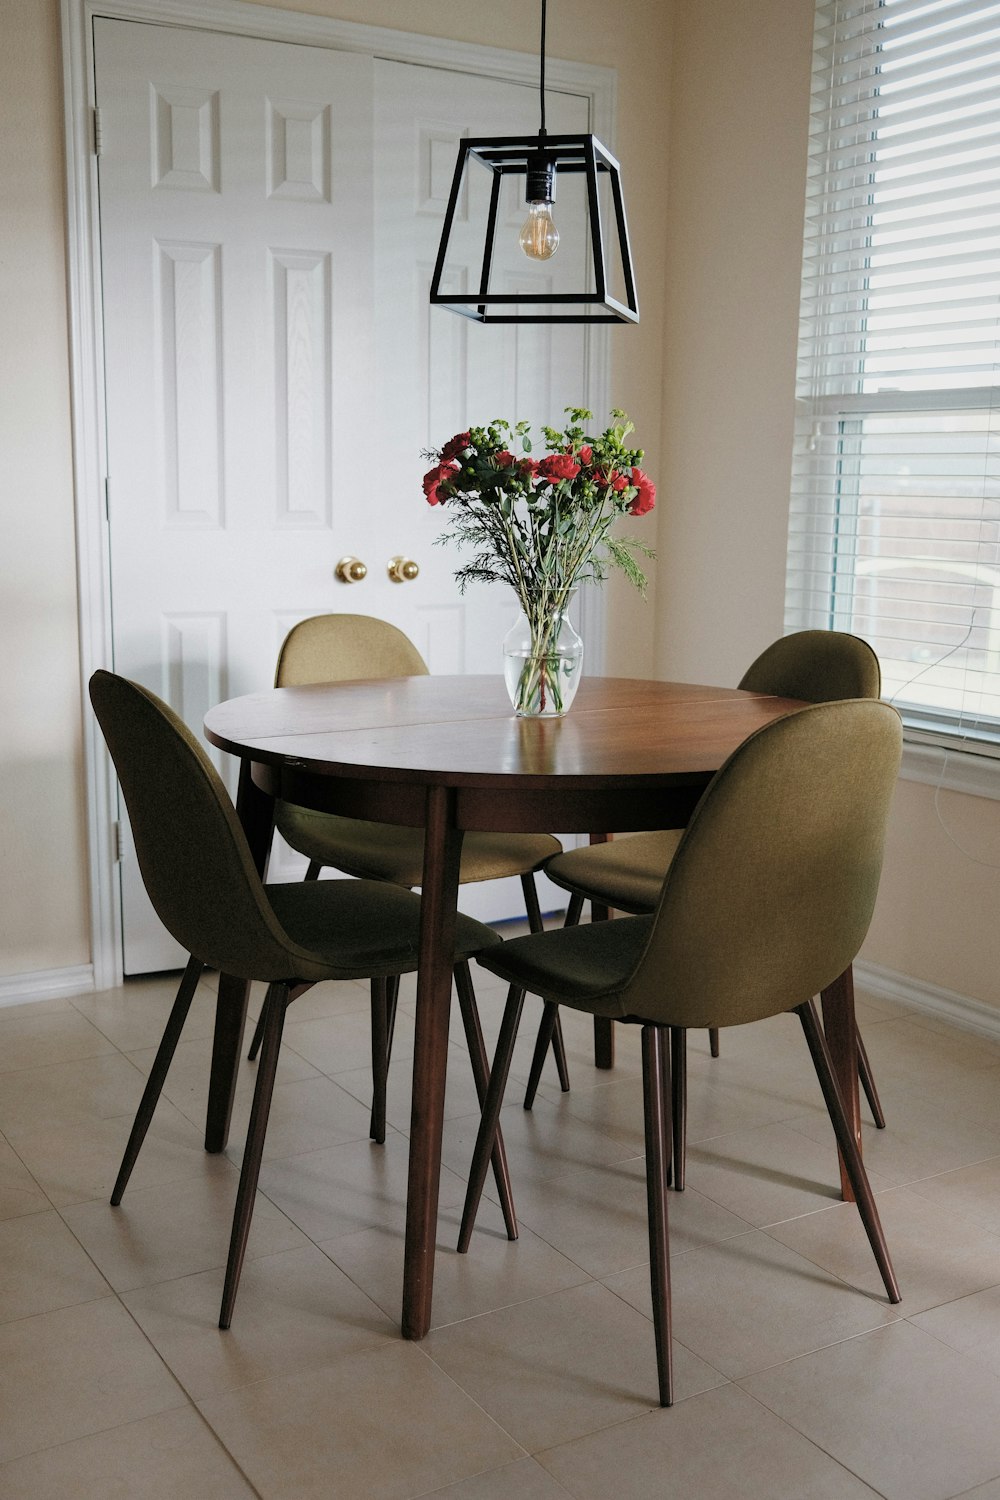 a dining room table with a vase of flowers on it